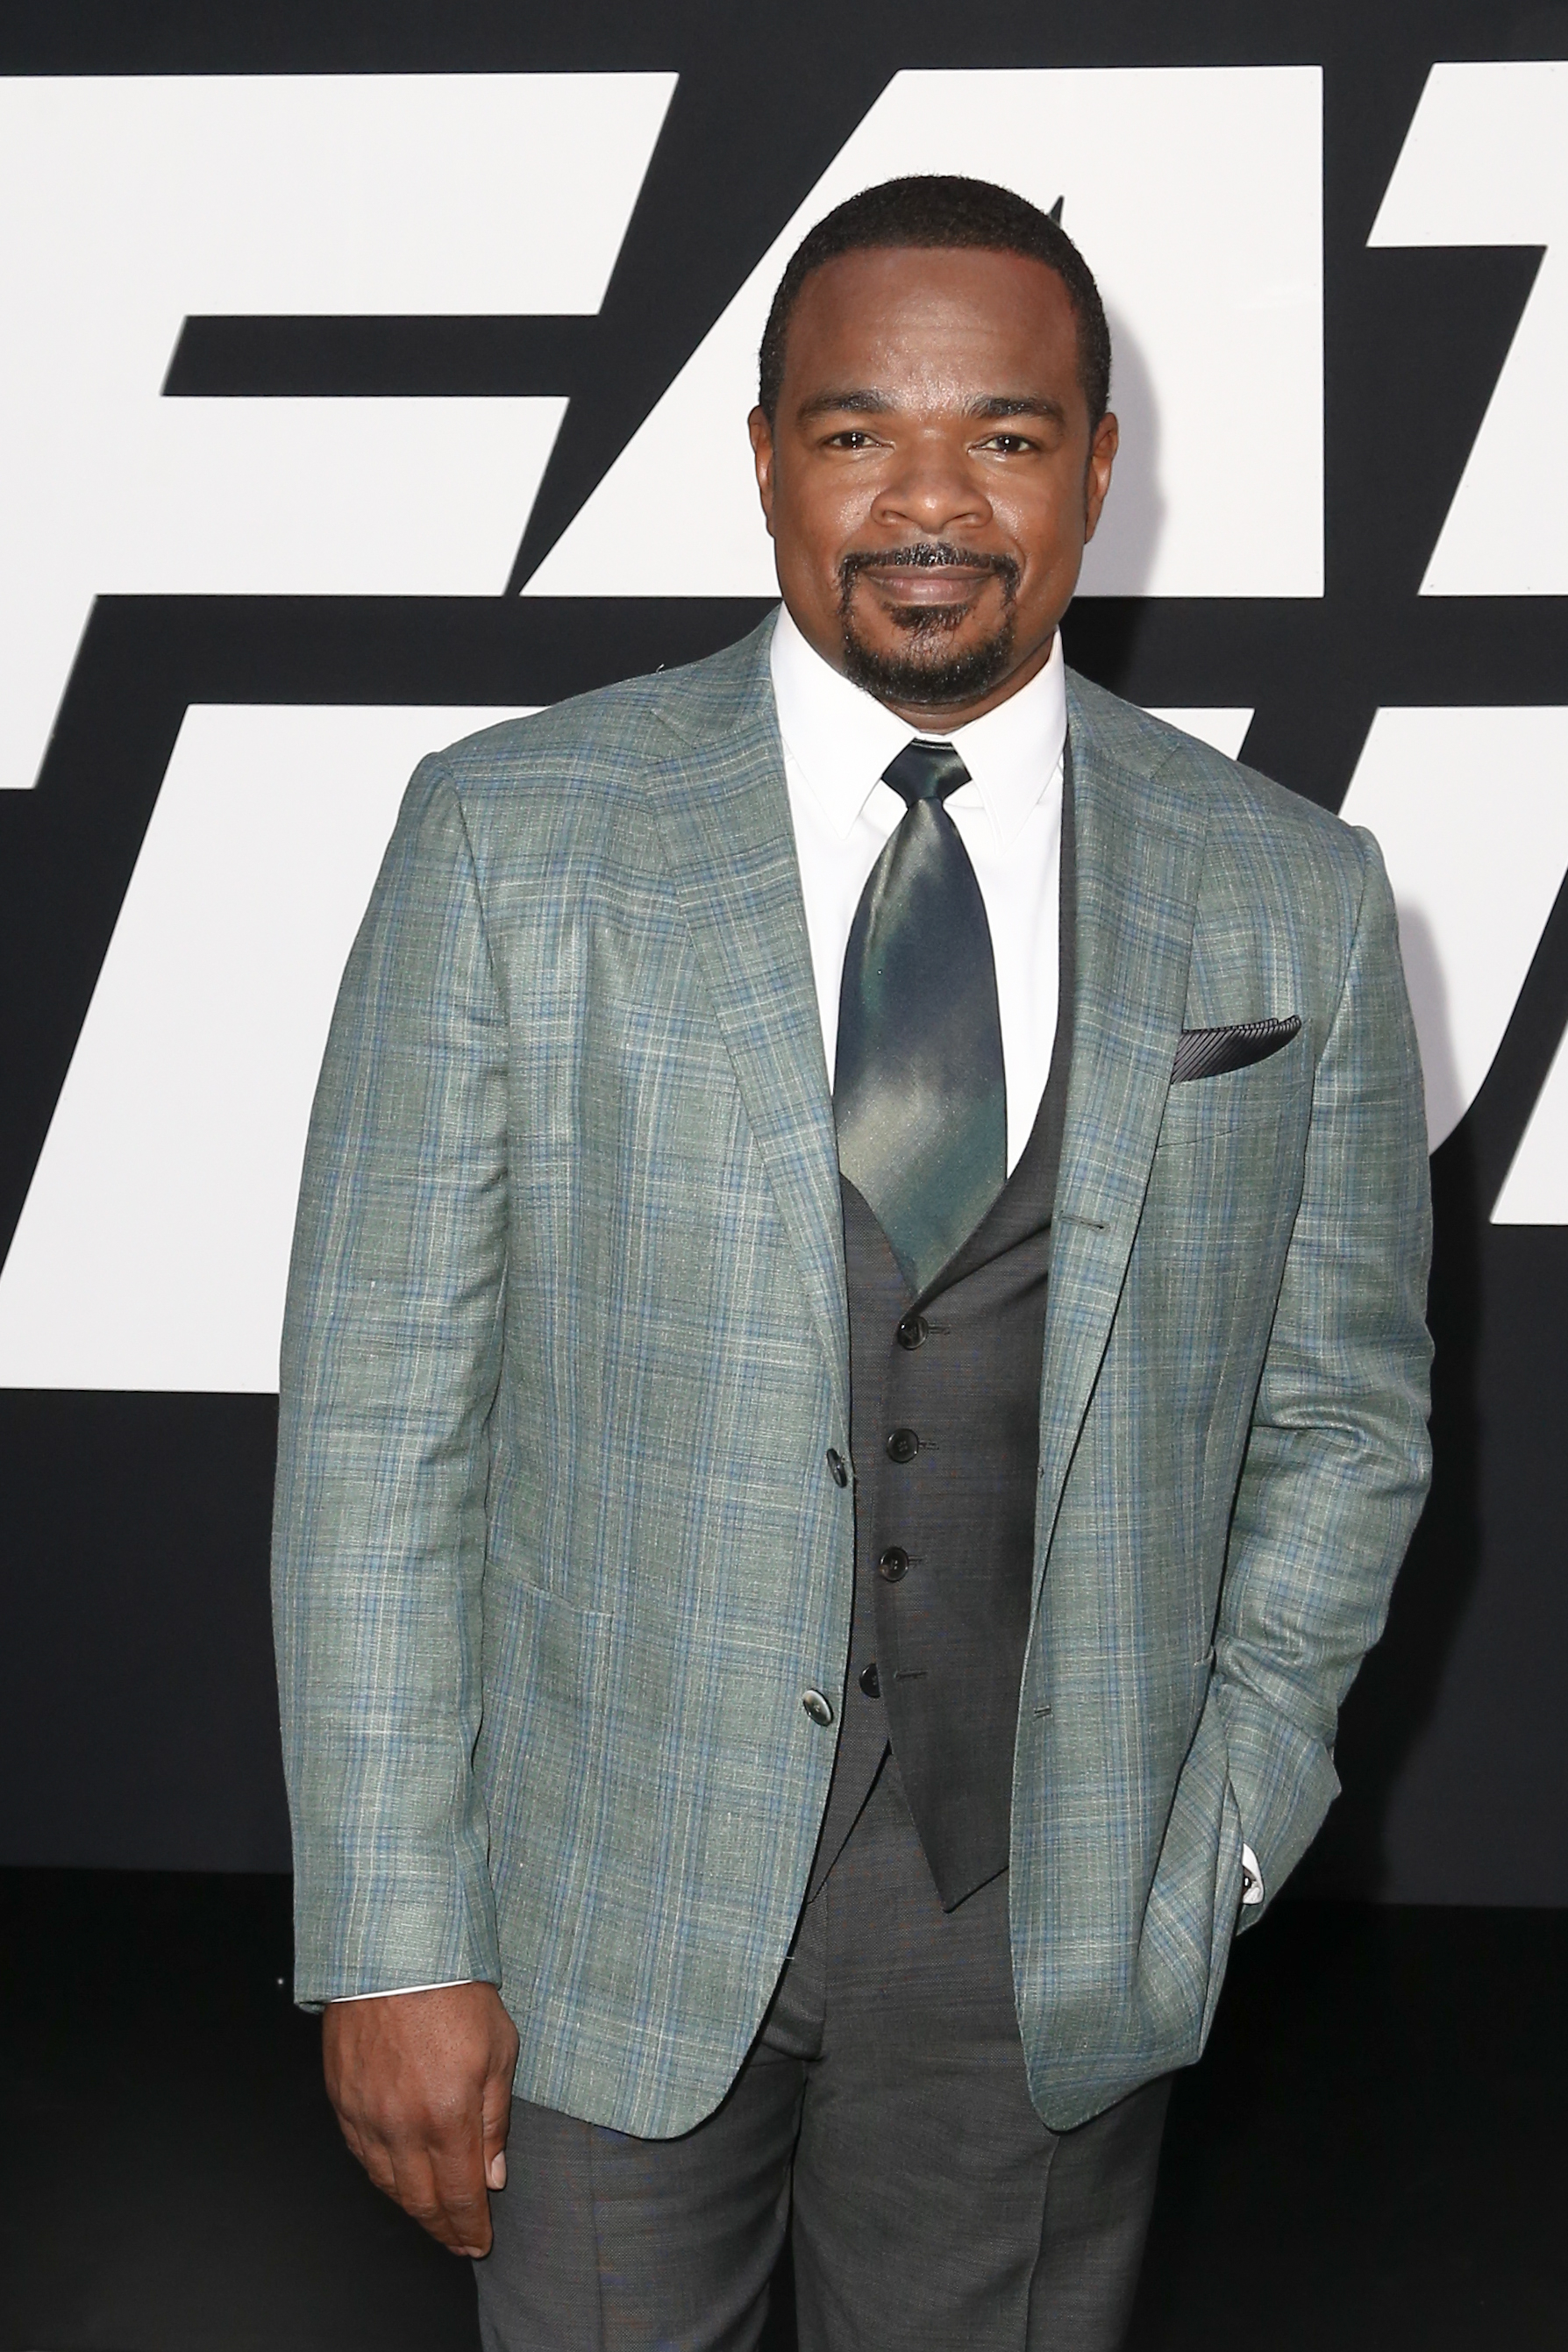 F. Gary Gray In Talks To Direct 'Men In Black' Spinoff